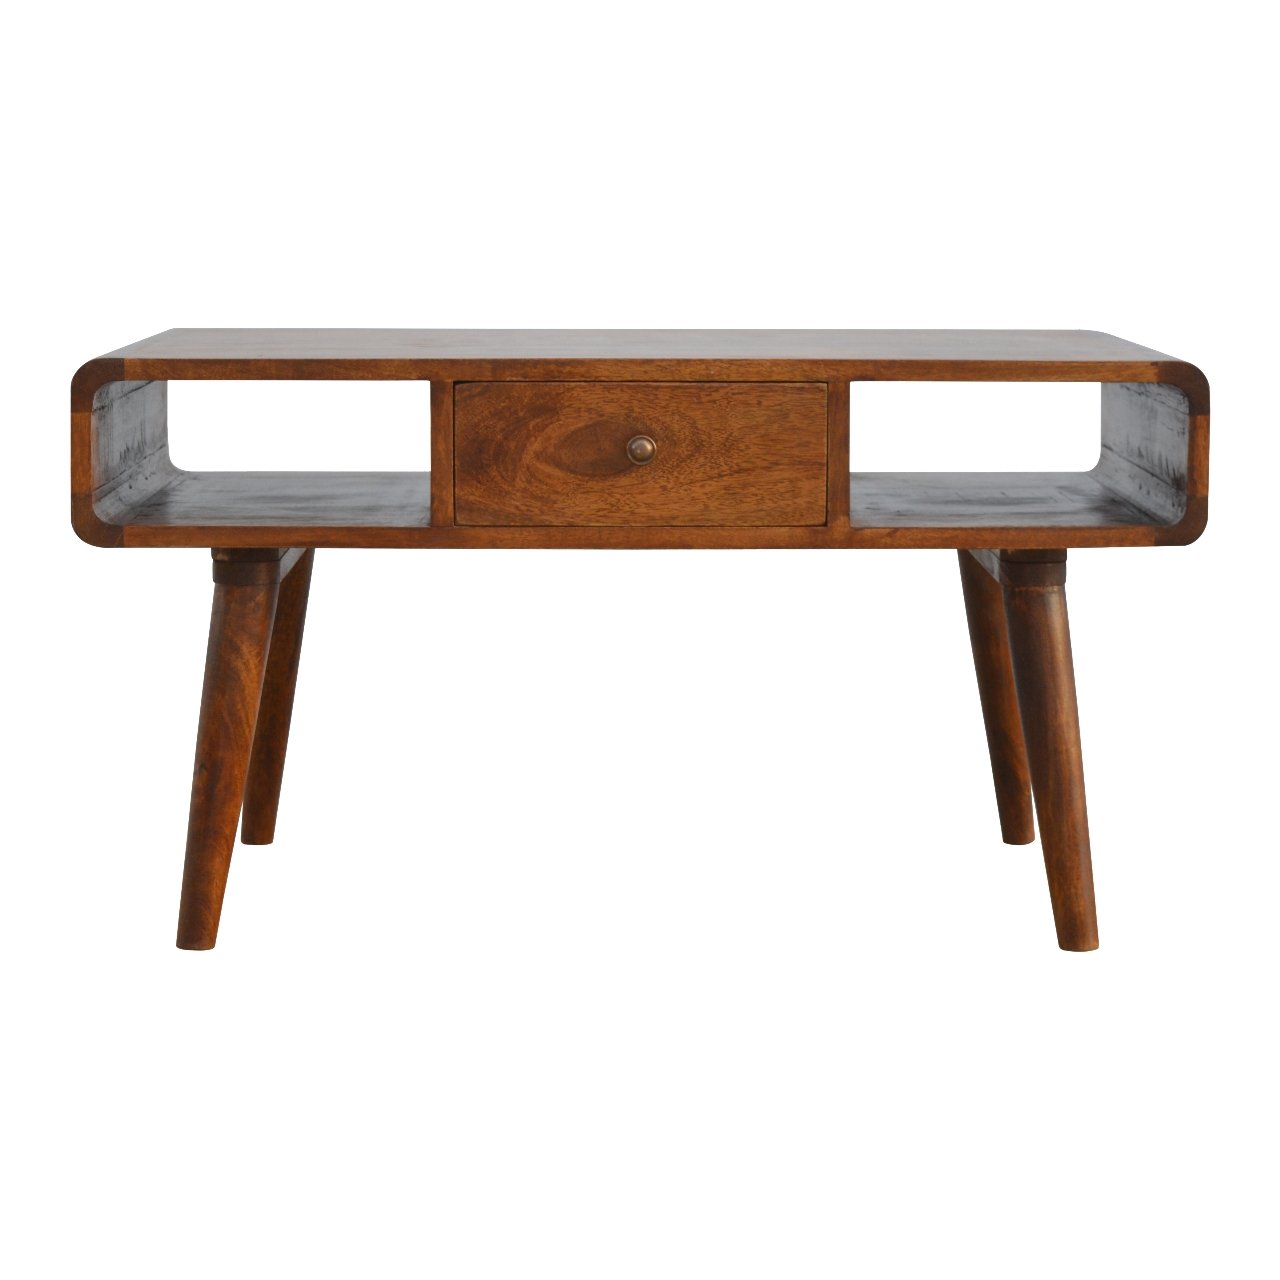 View Curved Chestnut Coffee Table information